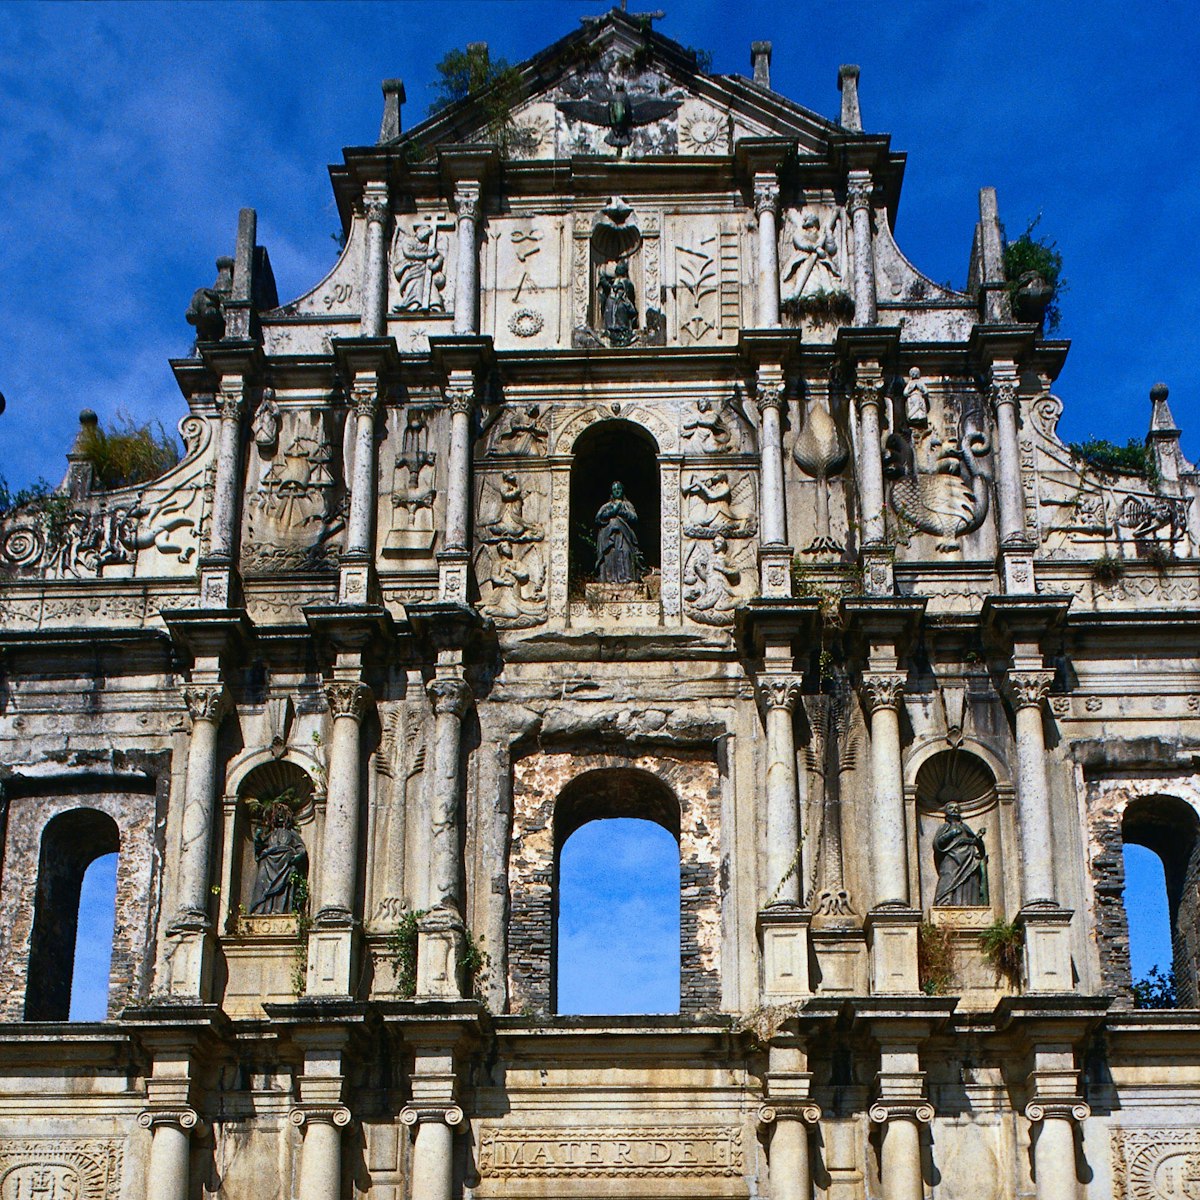 Facade of St Paul's Cathedral, Macau